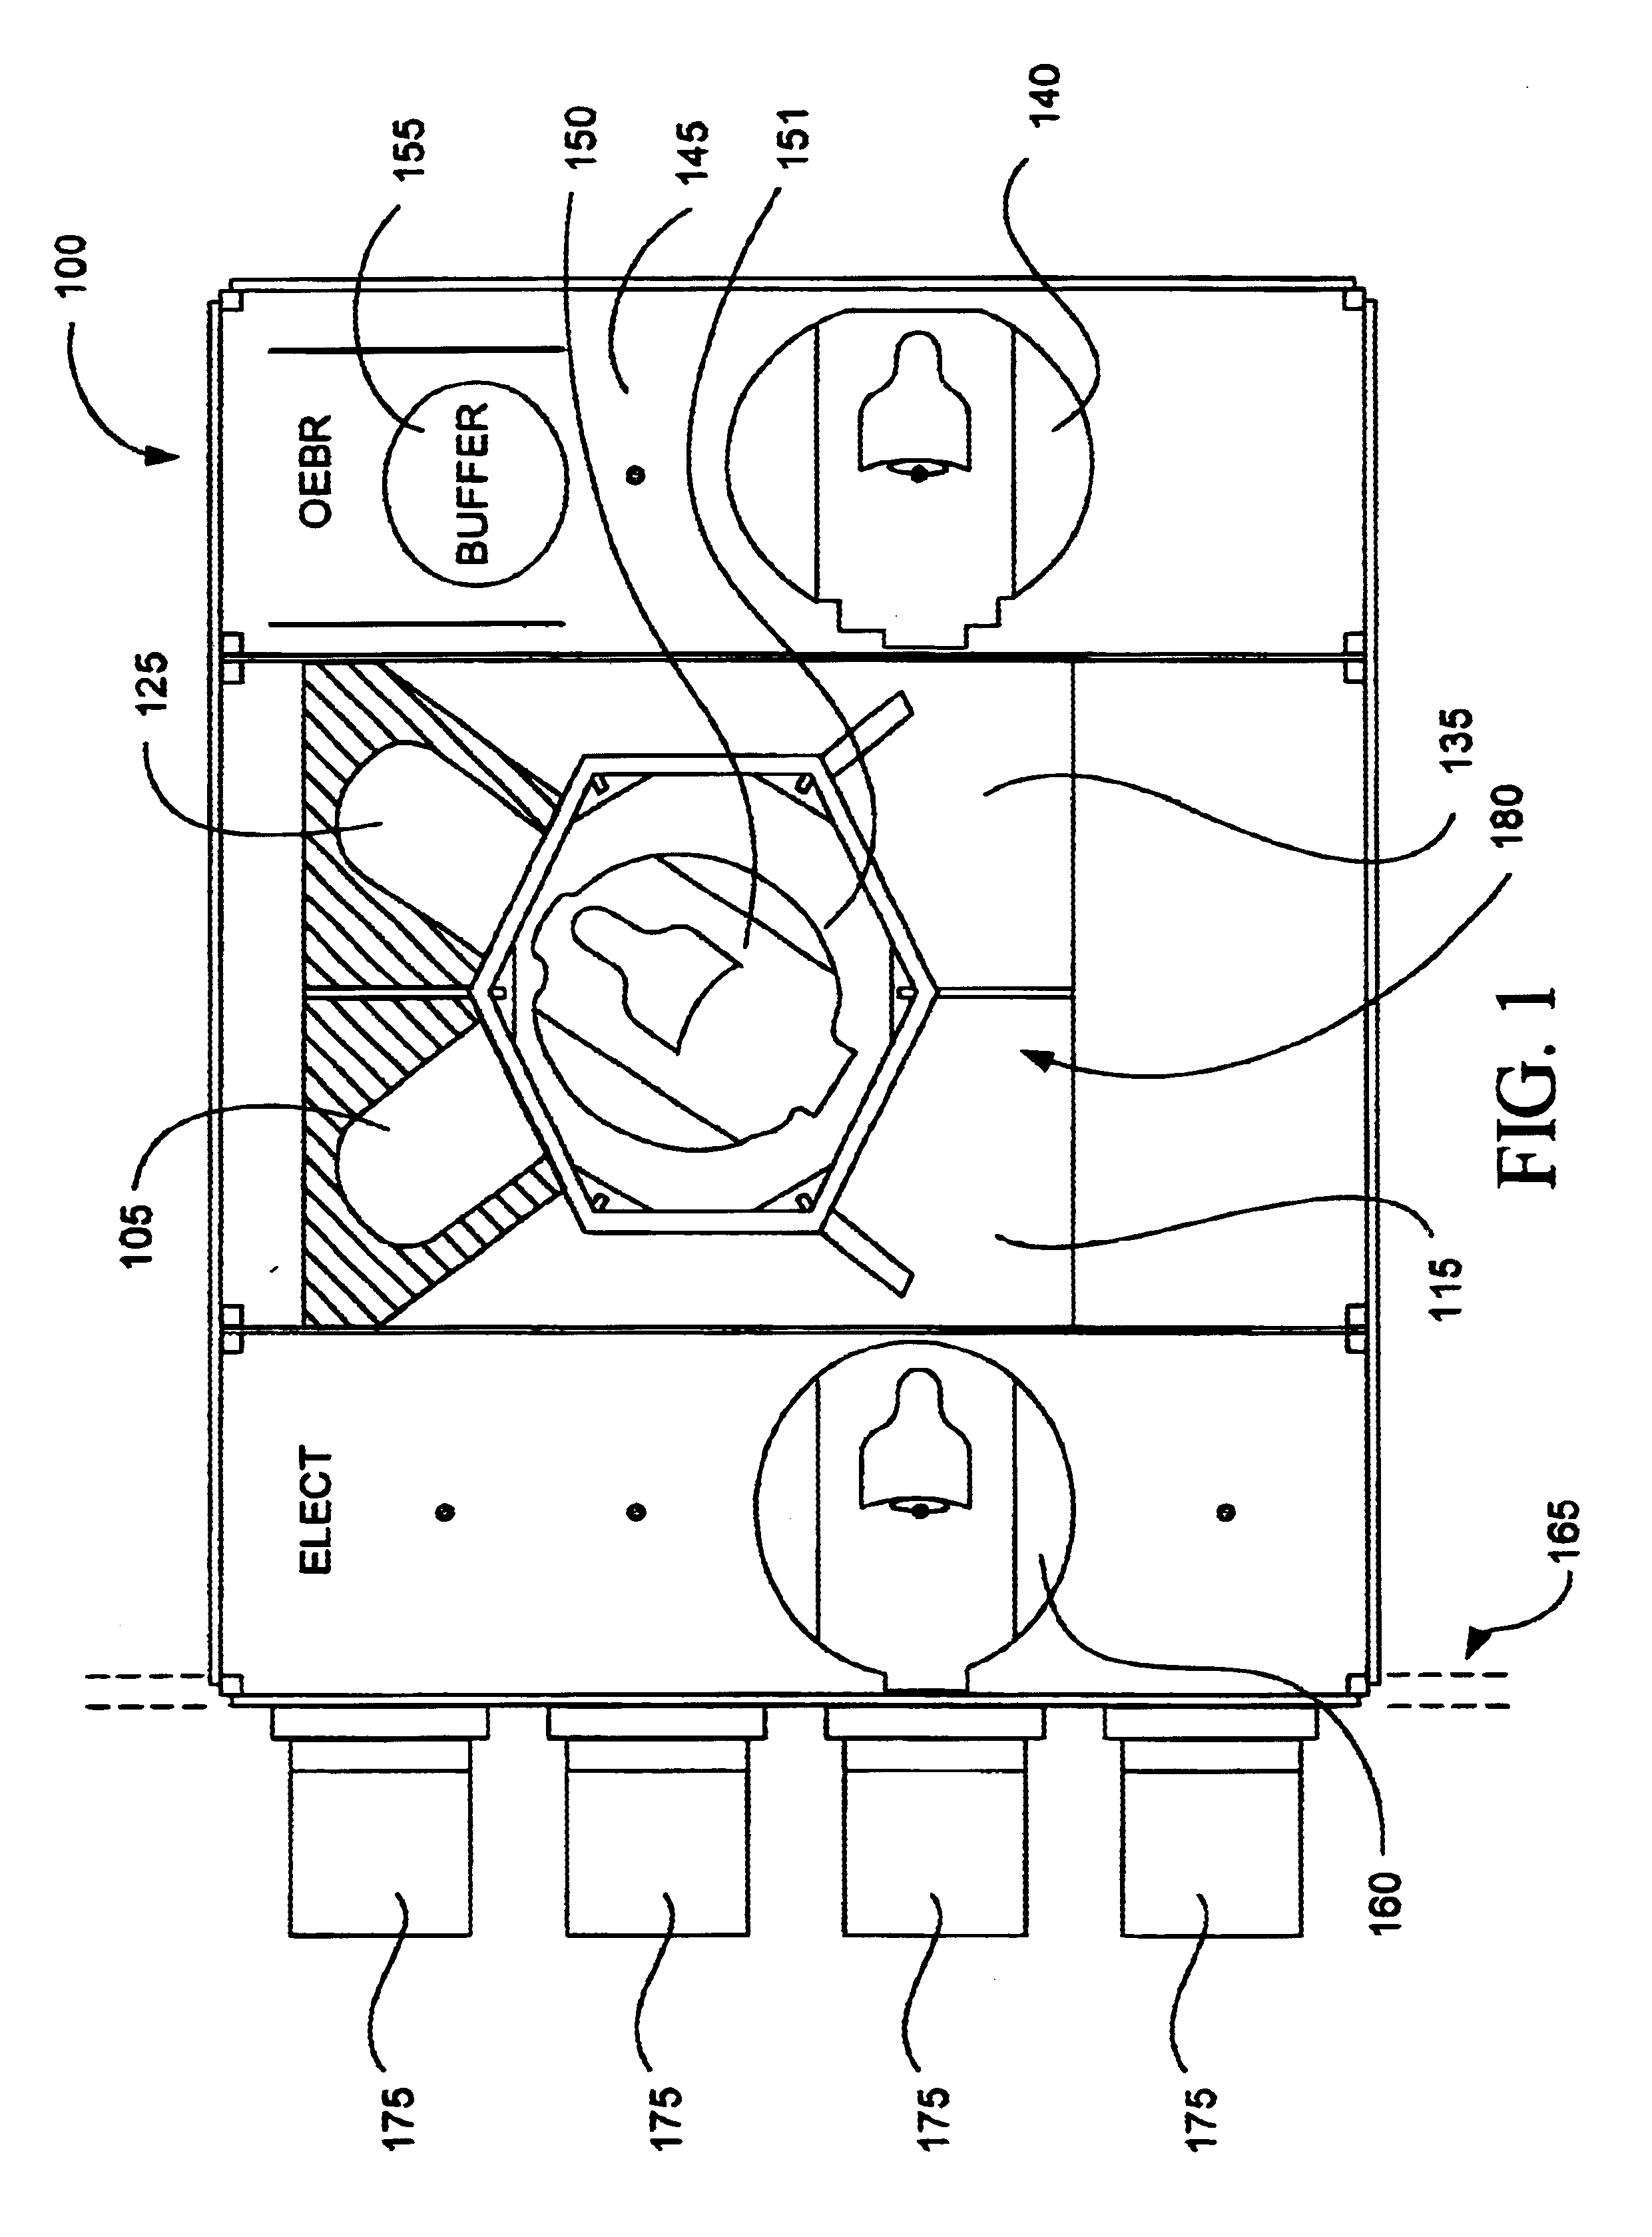 Apparatus for processing wafers